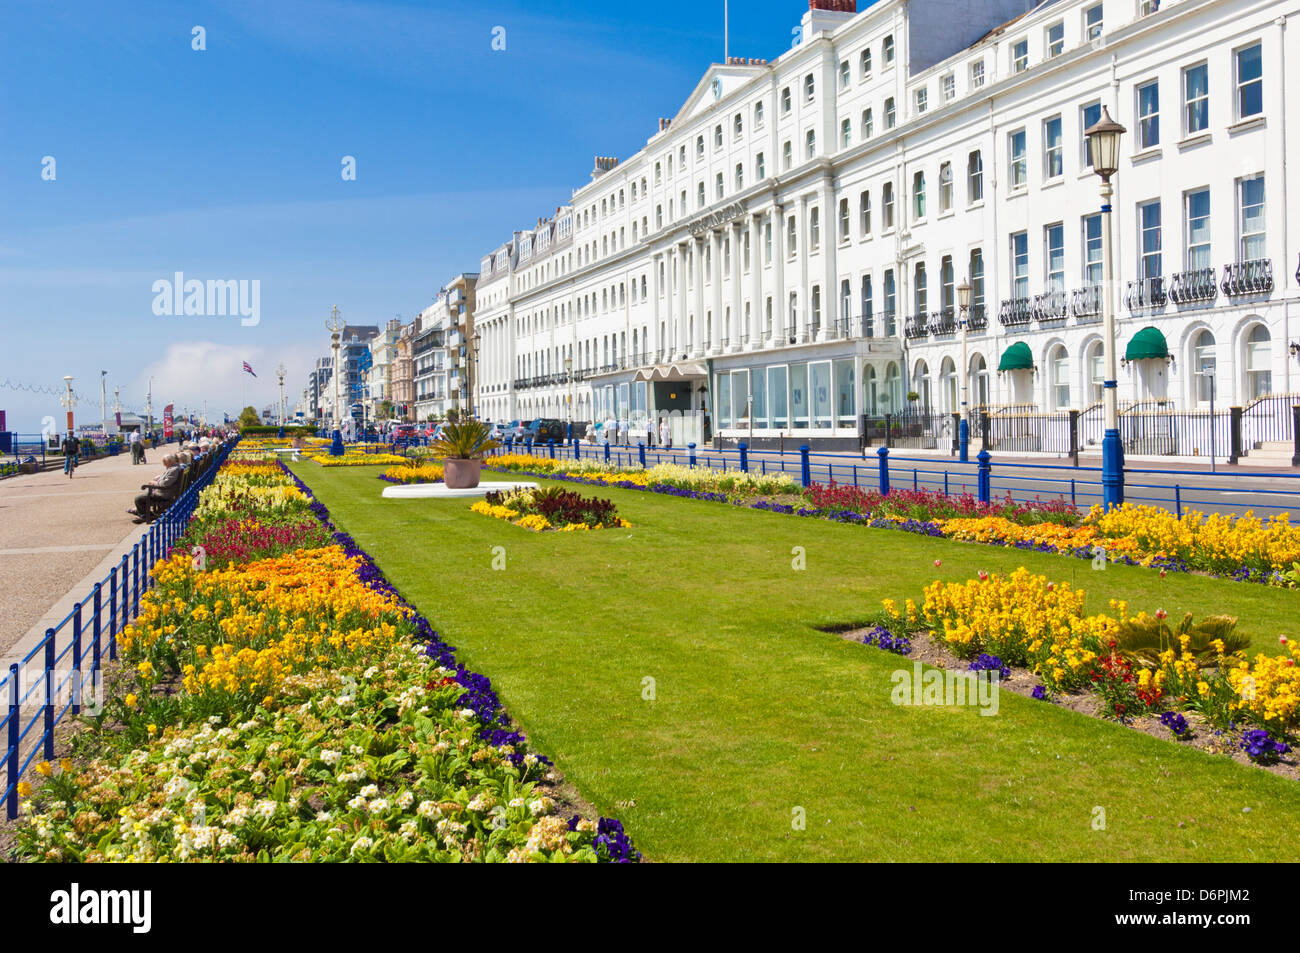 Eastbourne East Sussex large Hotels on the seafront promenade with flower filled gardens in Eastbourne East Sussex England GB UK, Europe Stock Photo